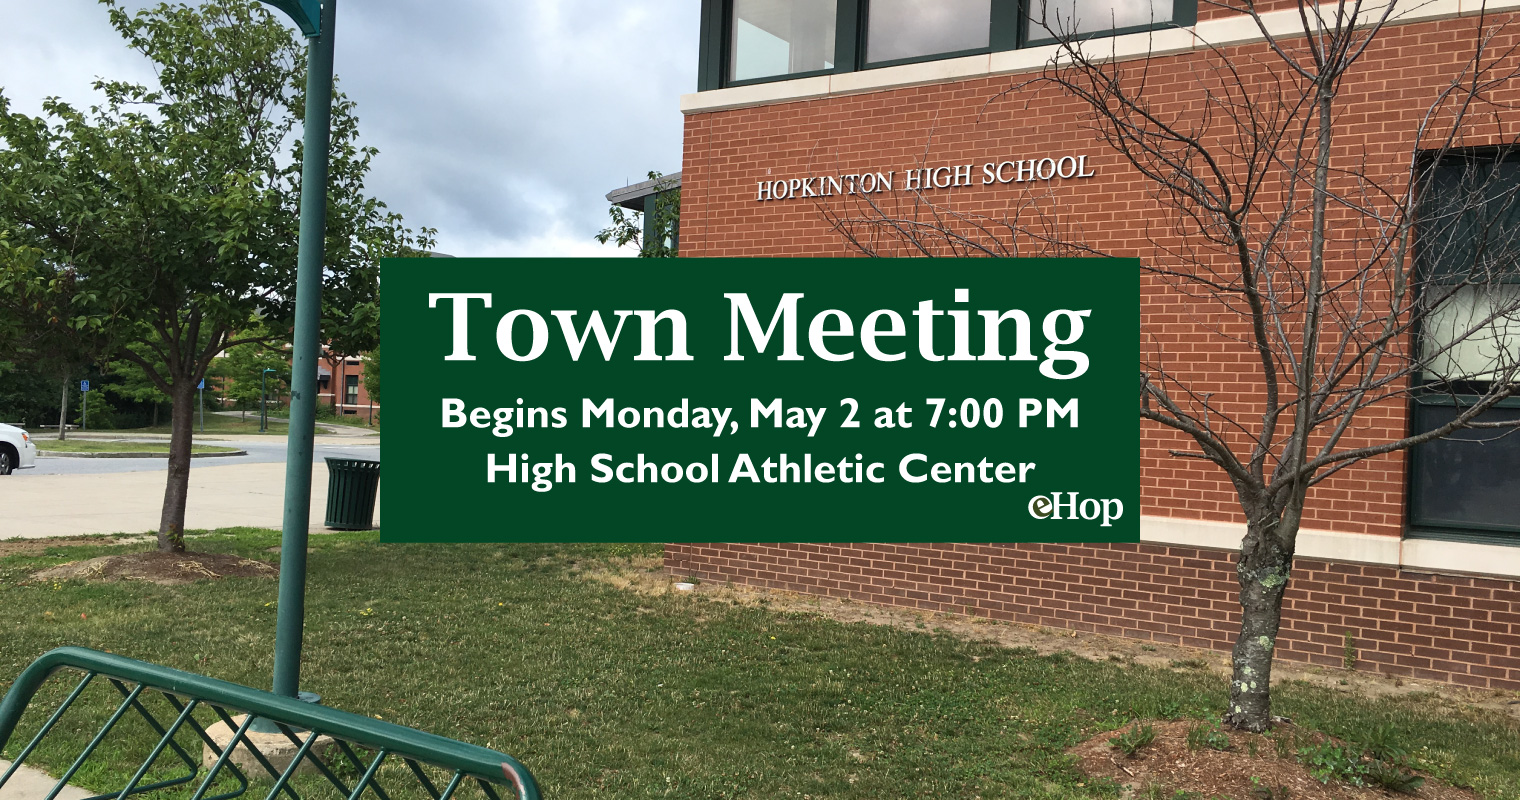 Town Meeting List of Articles with Details